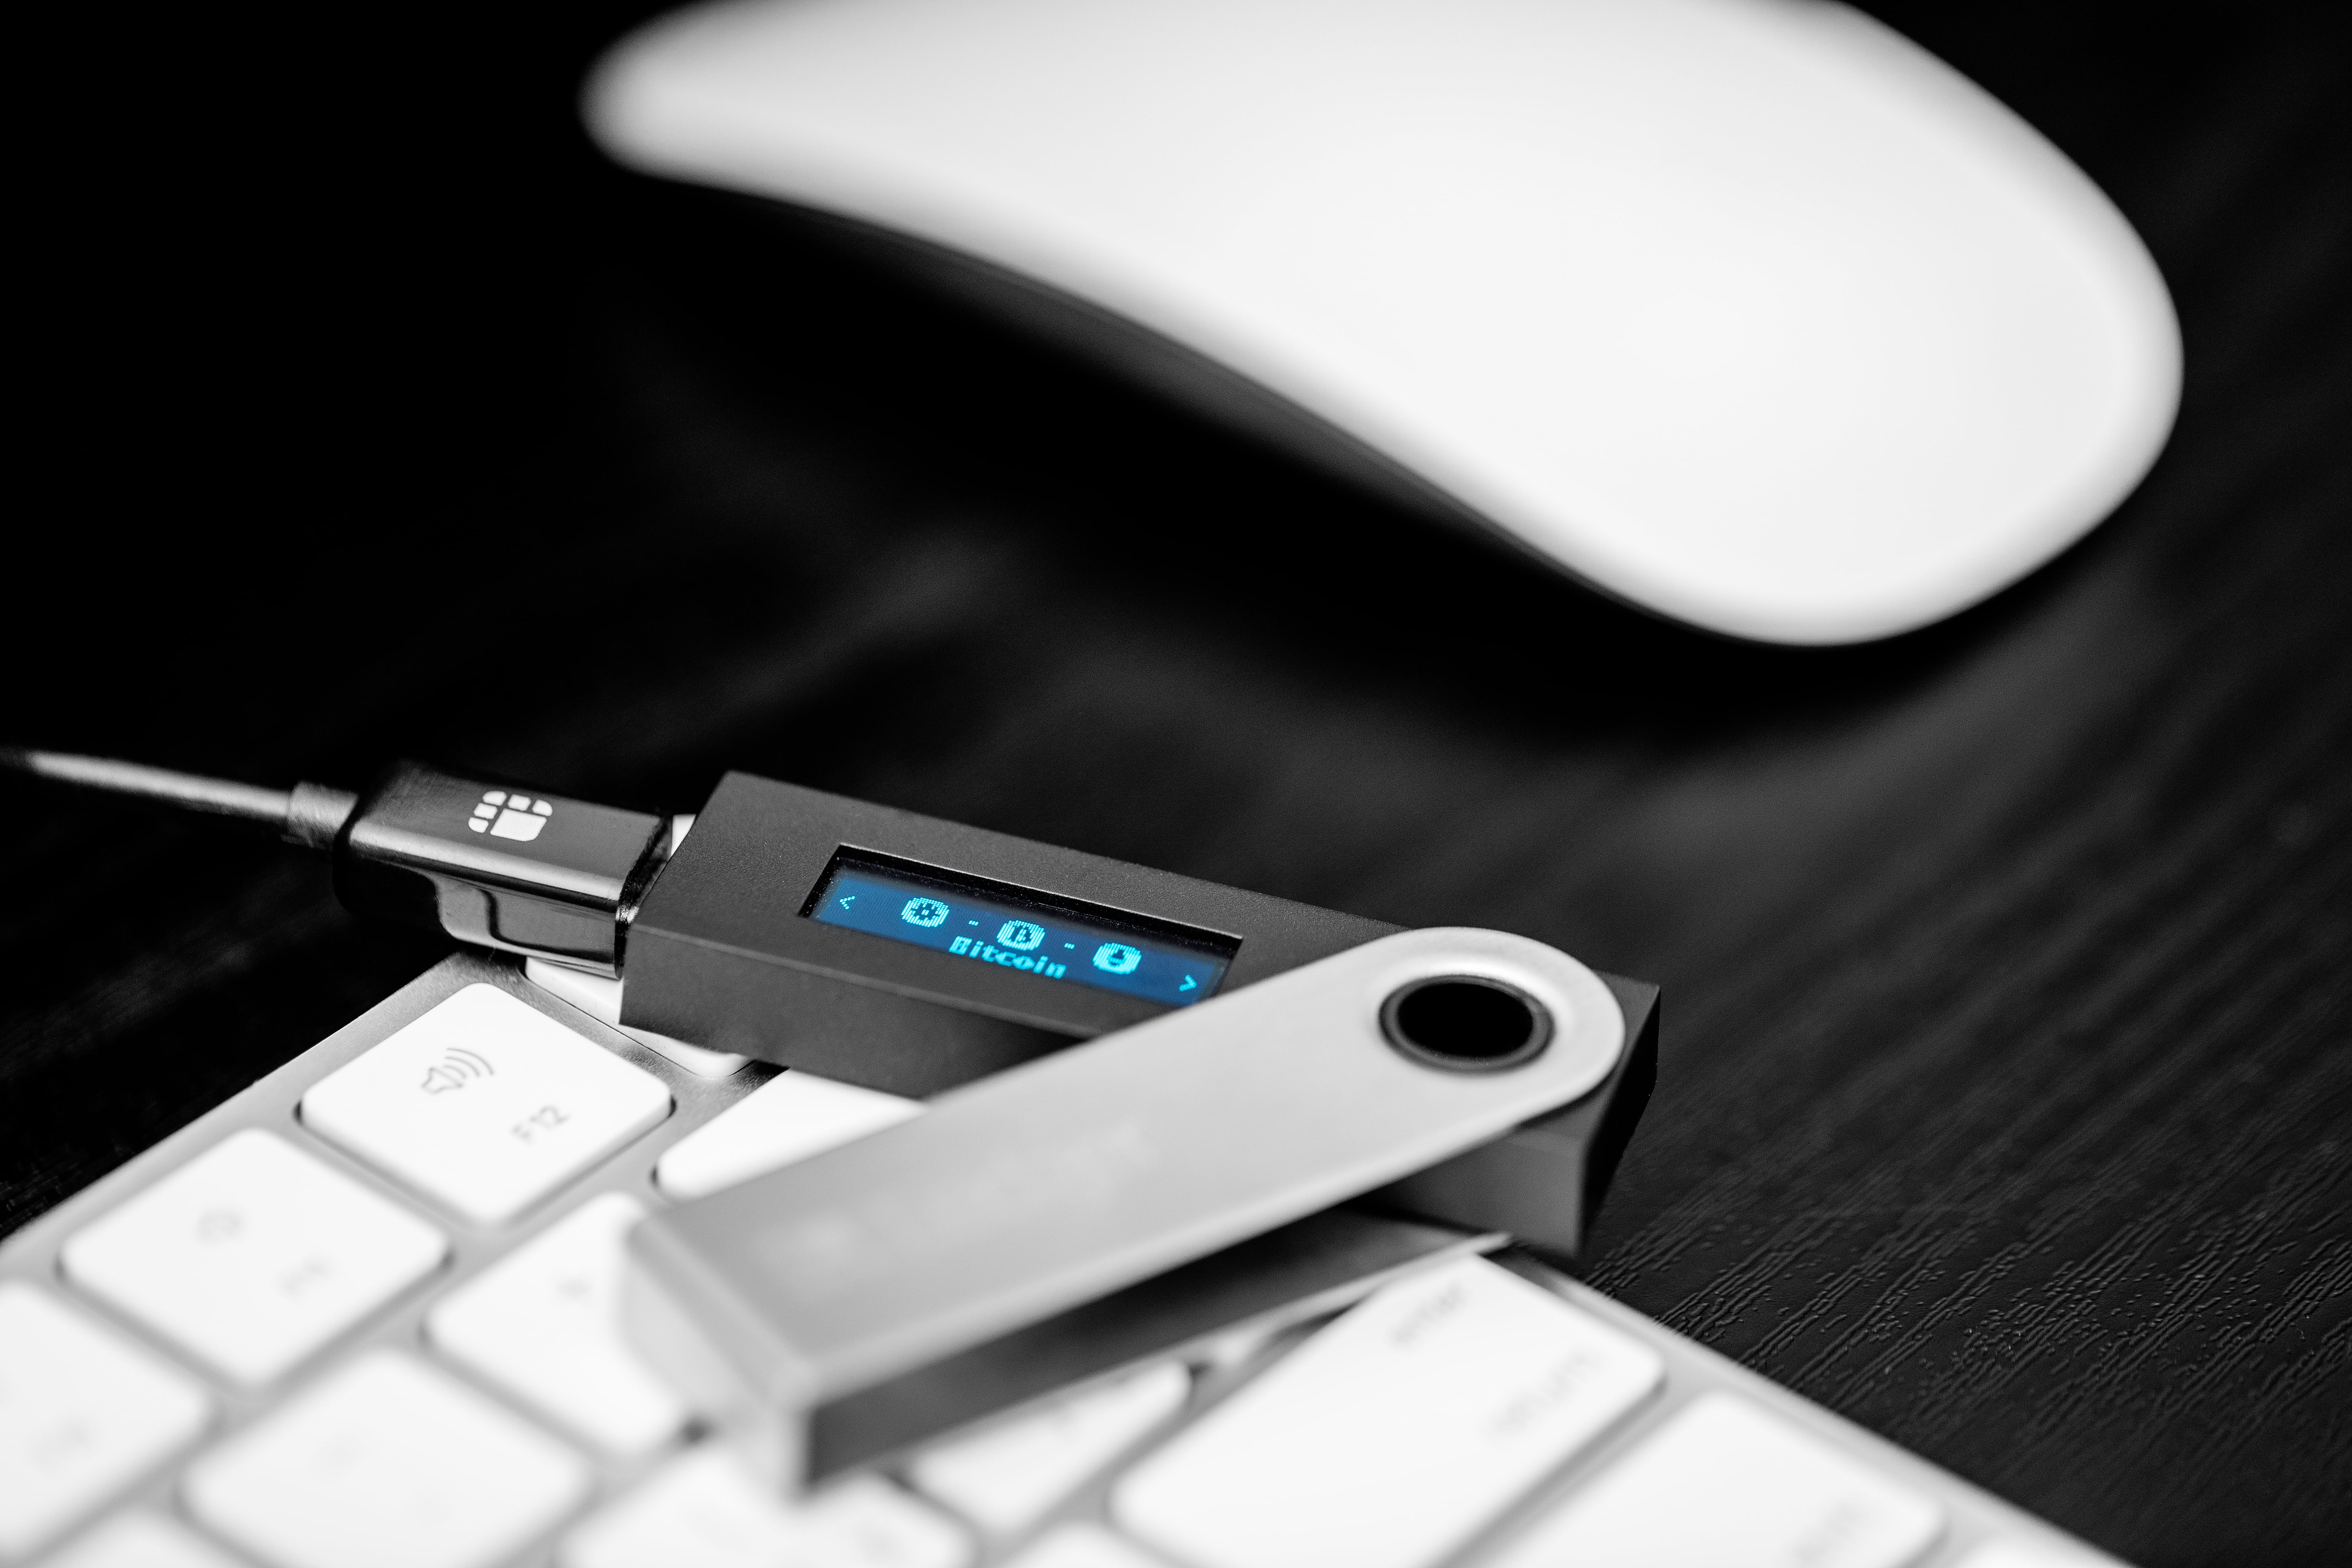 Crypto Wallet Ledger To Lay Off 10% of Workforce Following Product Issues